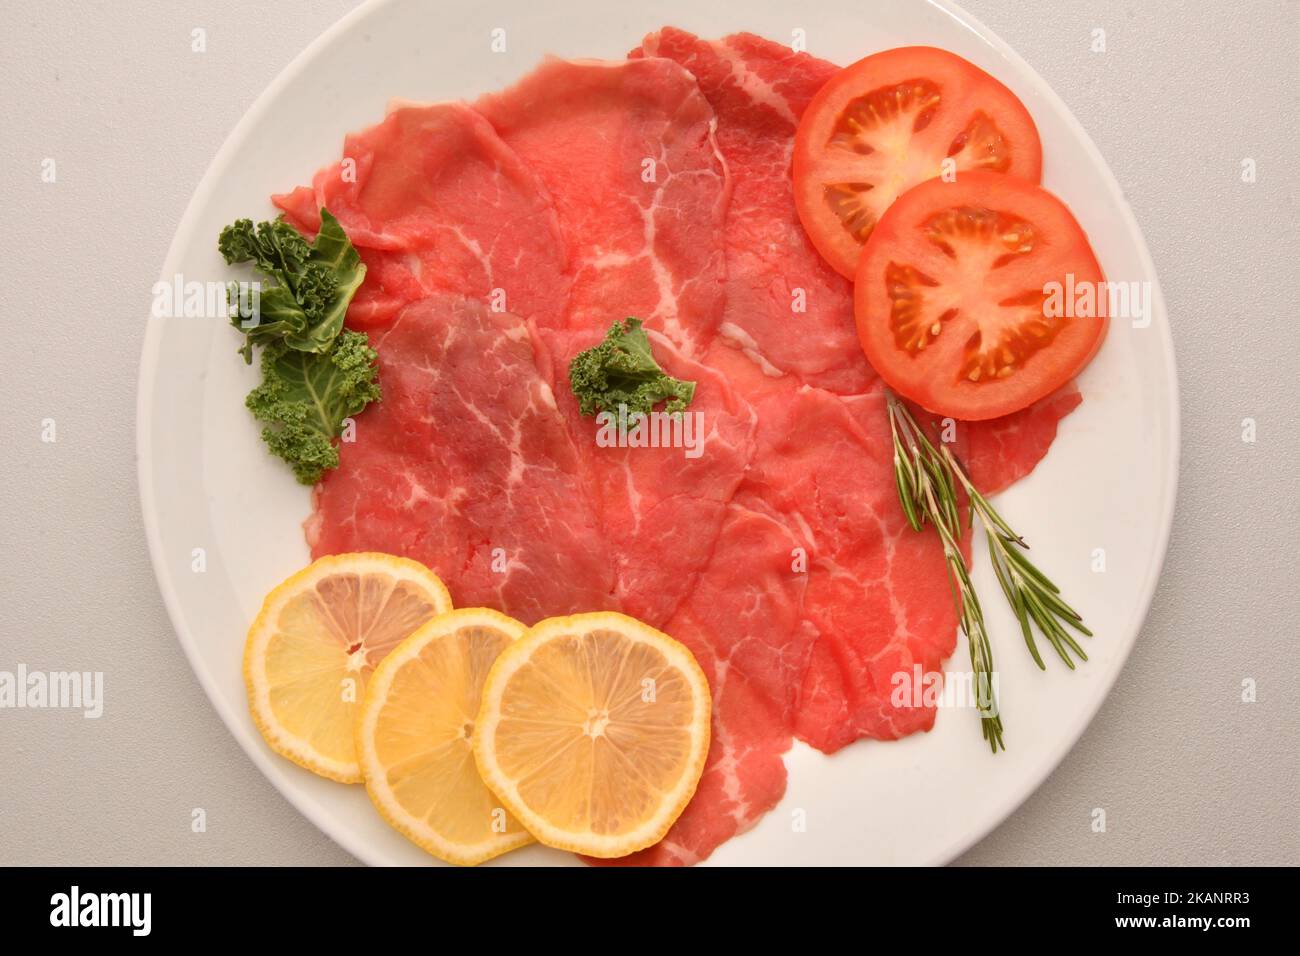 Beef carpaccio and fresh herbs for the Christmas table Stock Photo